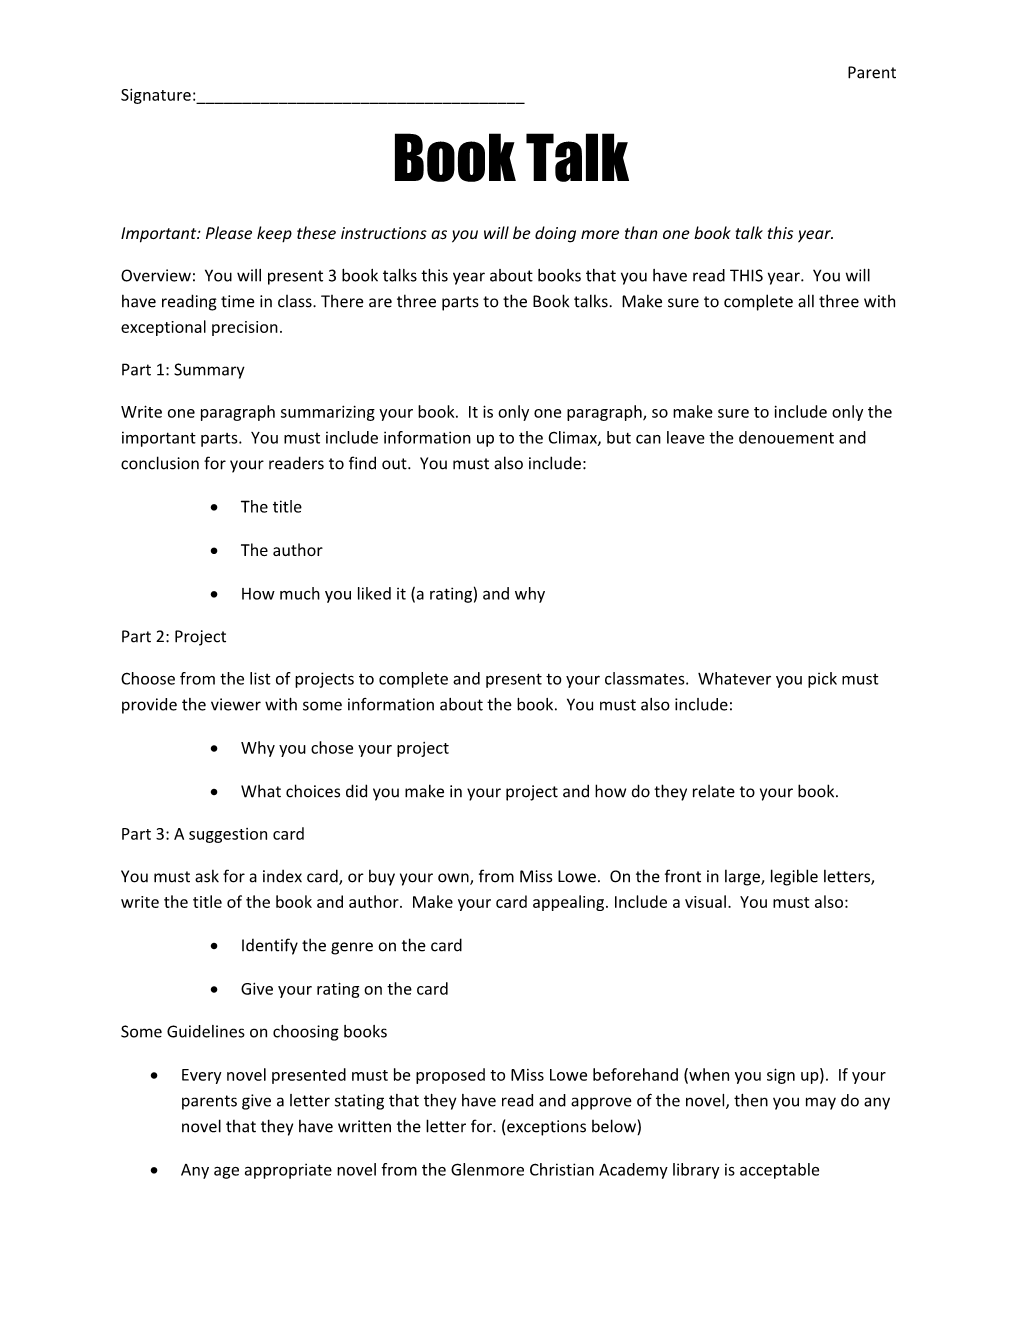 Important: Please Keep These Instructions As You Will Be Doing More Than One Book Talk